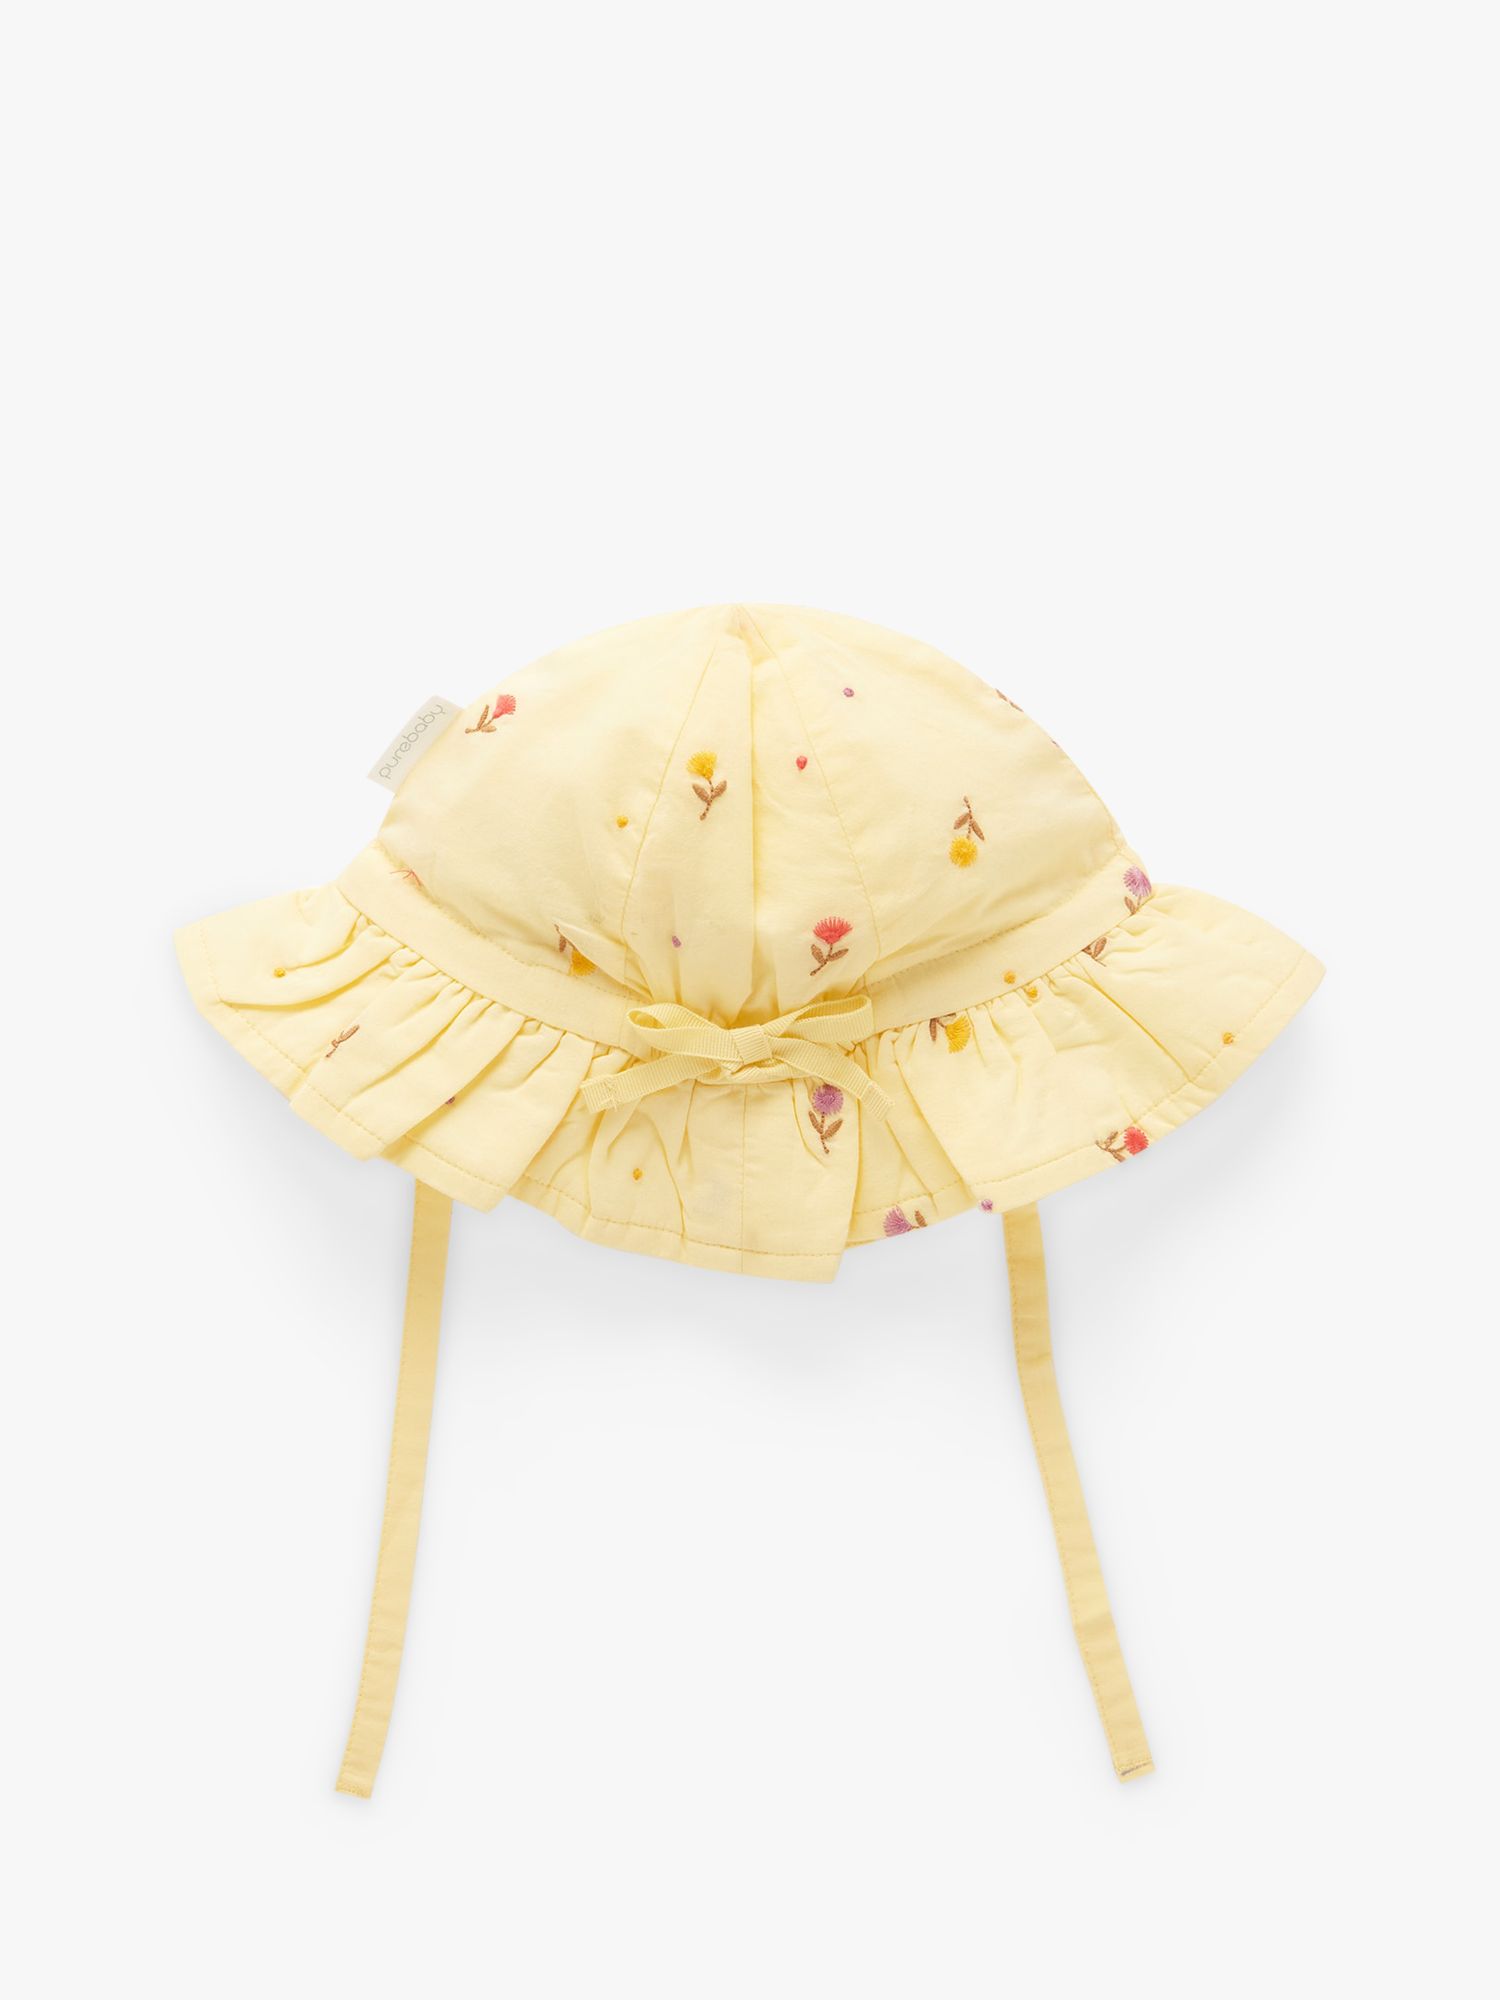 Purebaby Baby Tufted Floral Embroidered Sun Hat, Yellow/Multi, 6-12 months